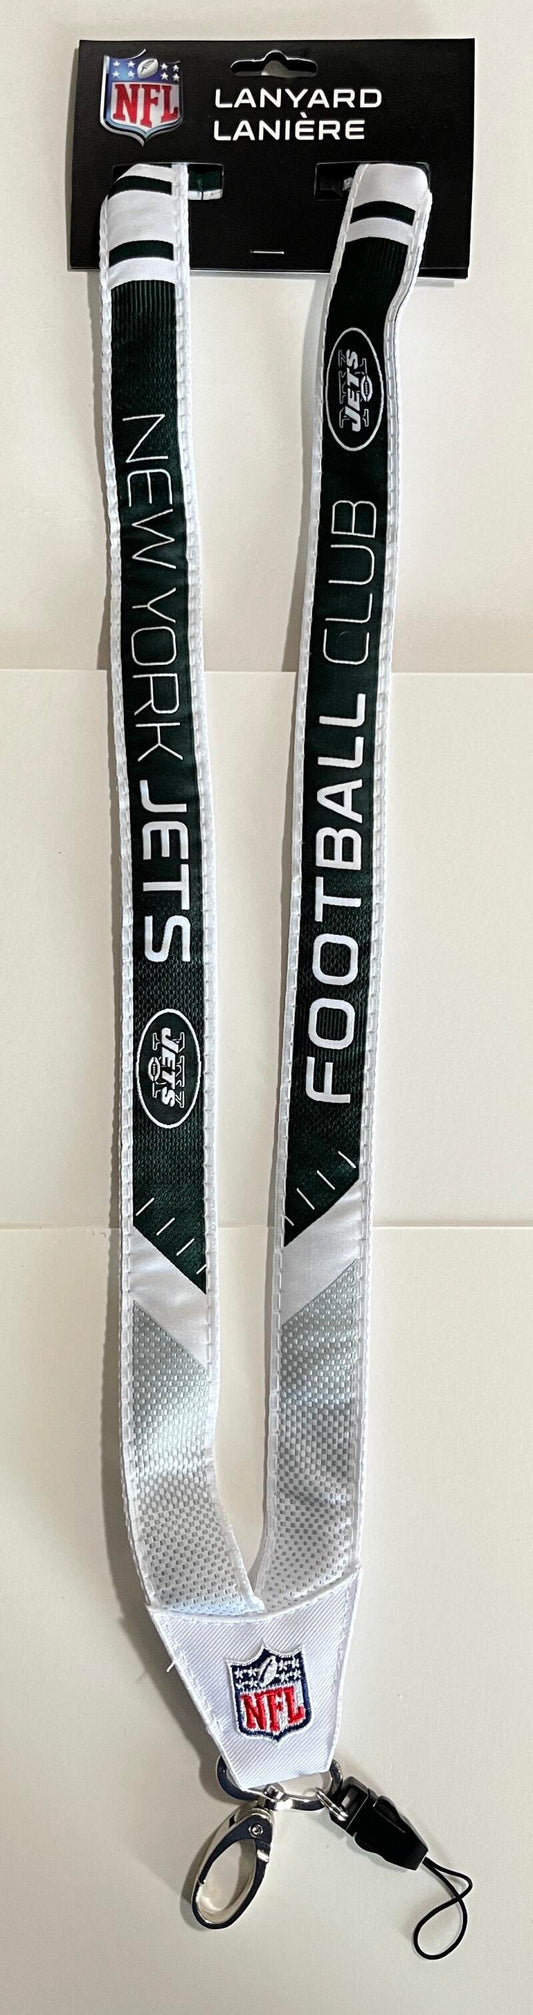 New York Jets Woven Licensed NFL Football Lanyard Metal Clasp Image 1